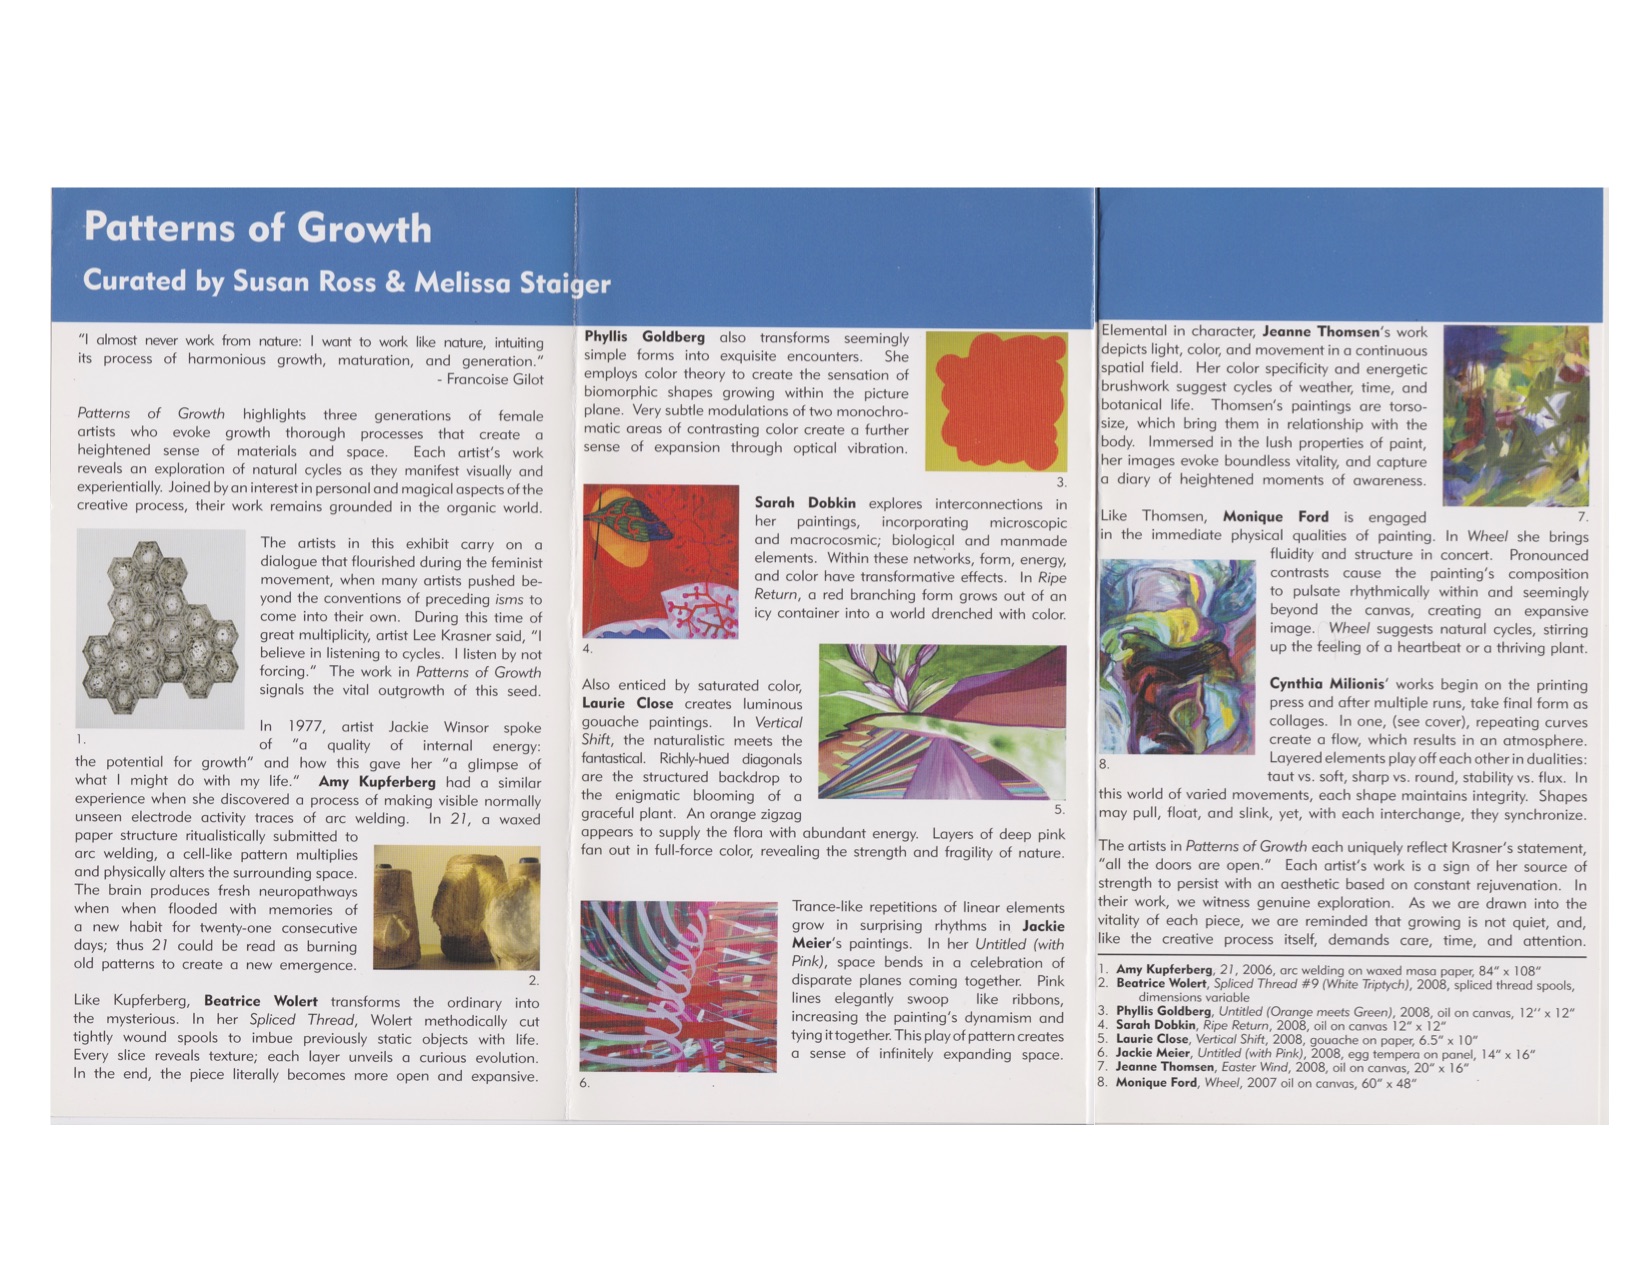 Patterns of Growth Catalogue.jpg